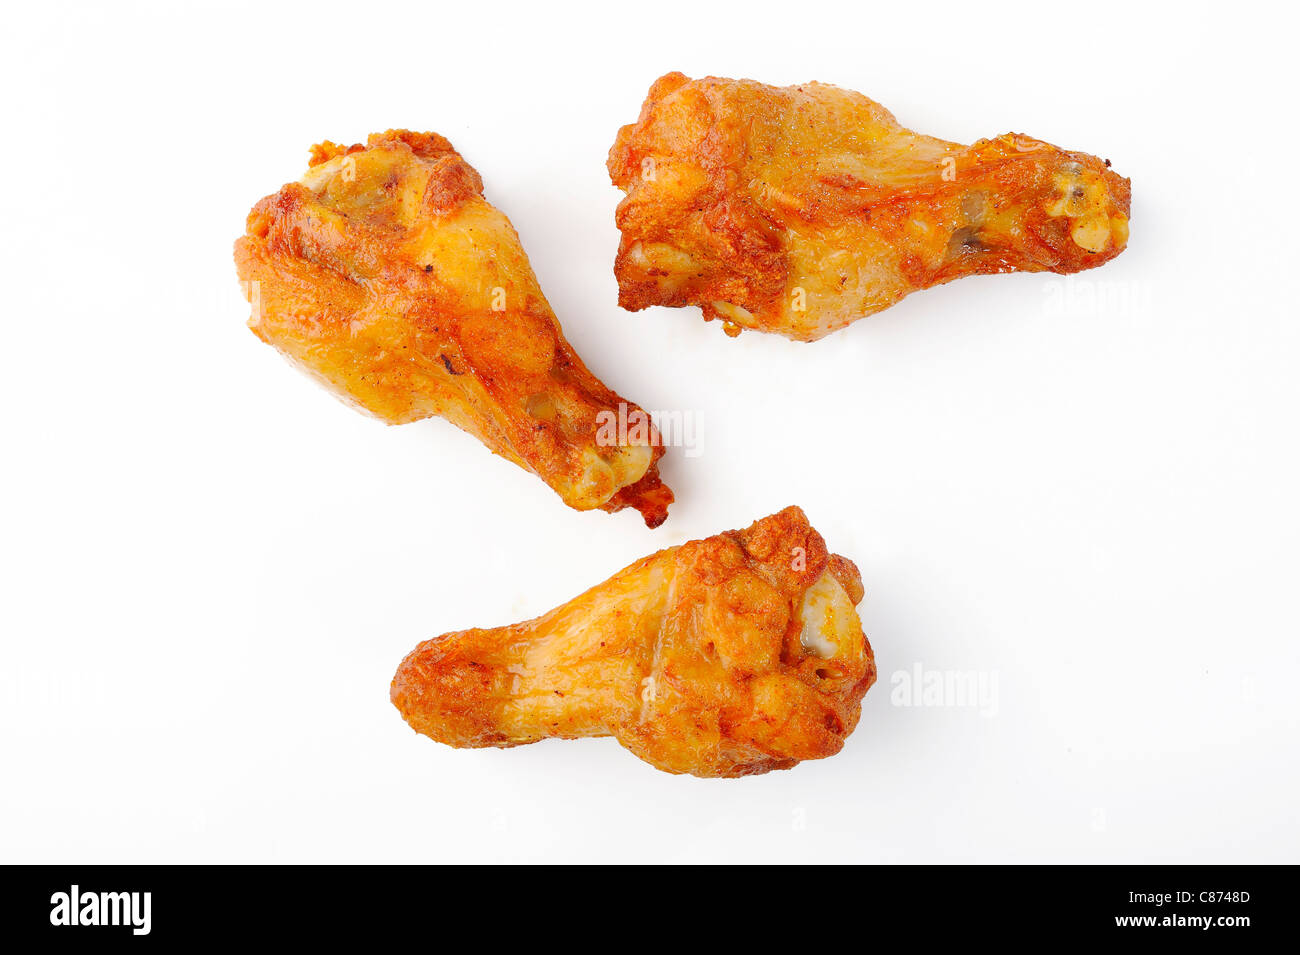 Chicken wing isolated on white background Stock Photo